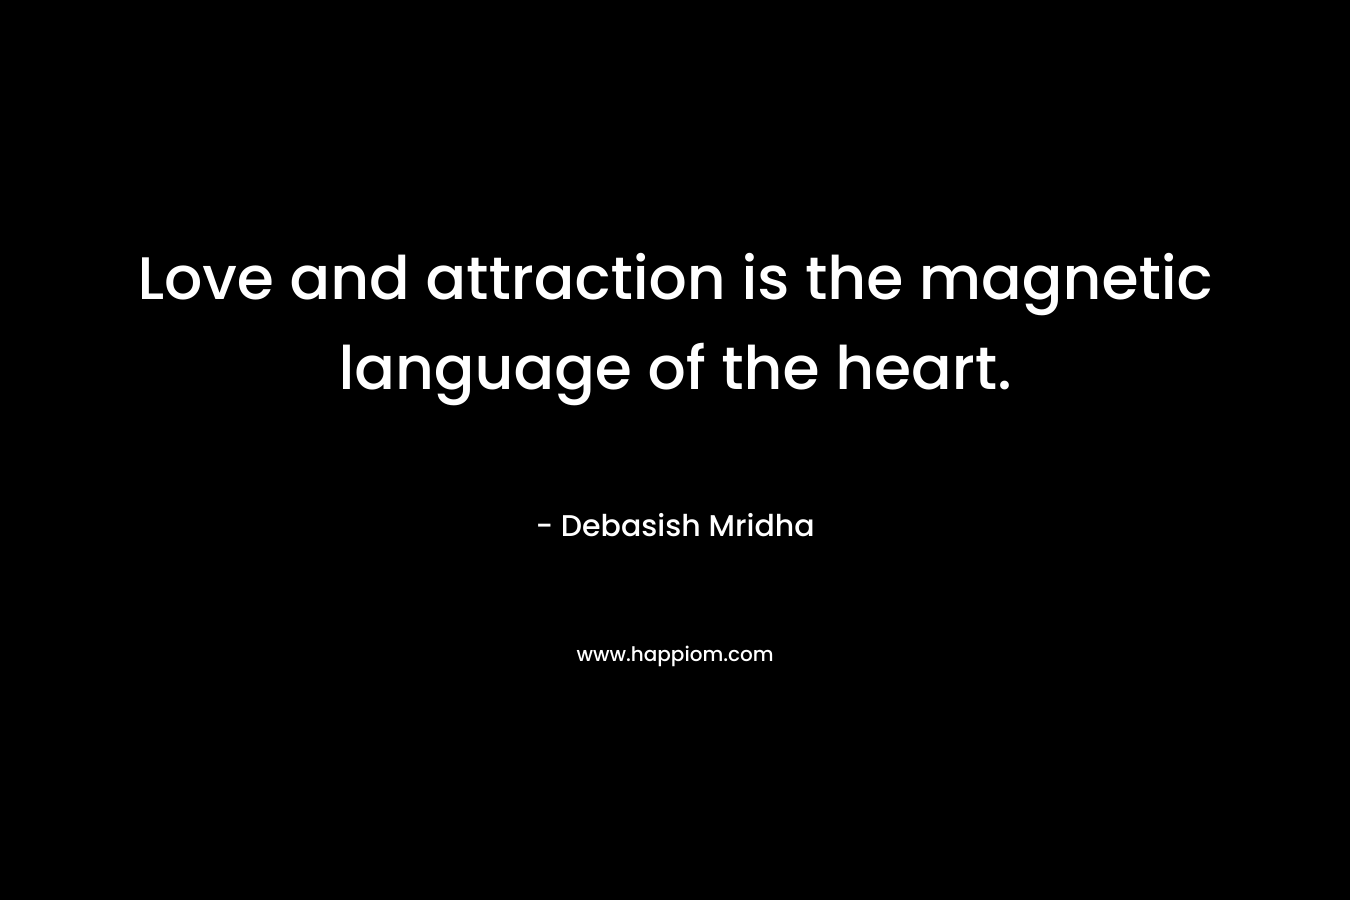 Love and attraction is the magnetic language of the heart.